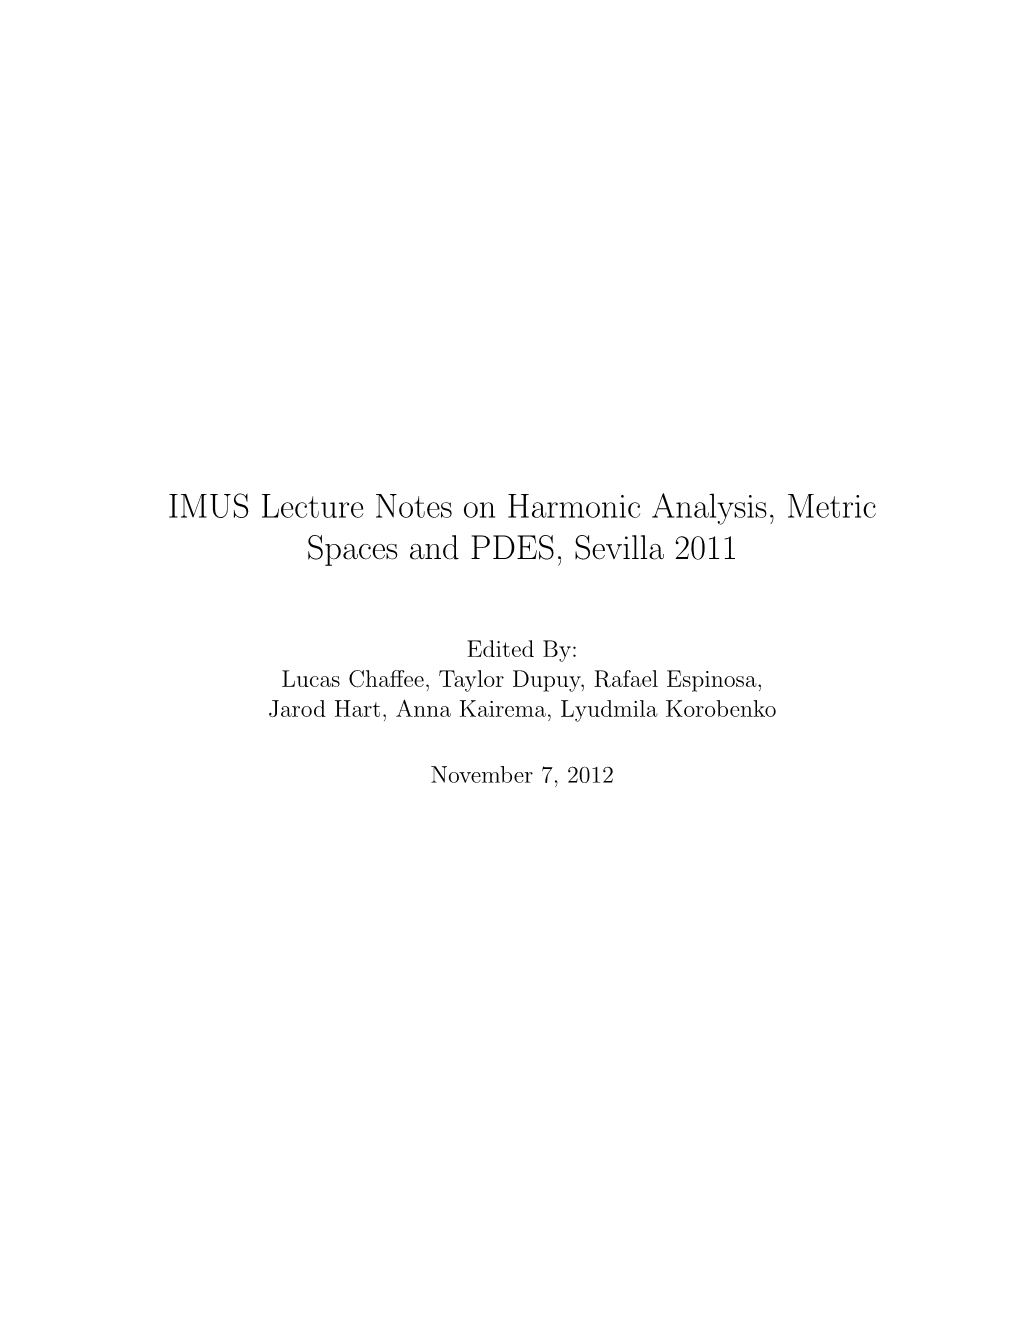 IMUS Lecture Notes on Harmonic Analysis, Metric Spaces and PDES, Sevilla 2011